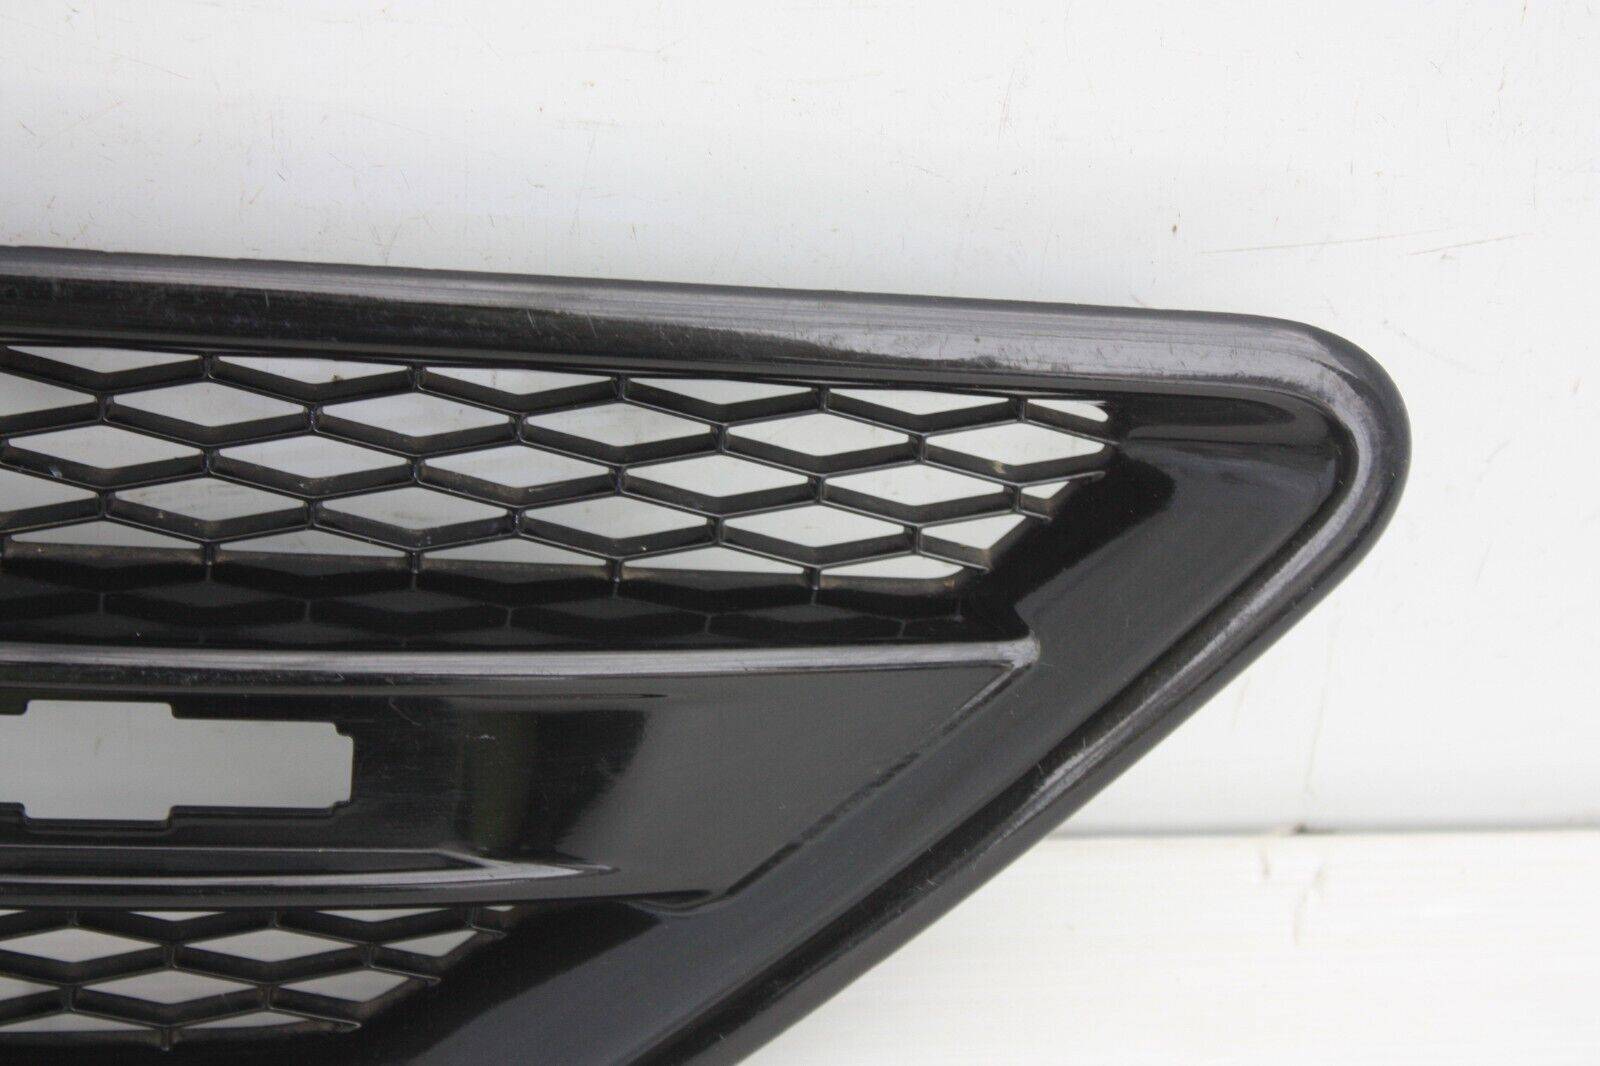 Land-Rover-Freelander-Front-Right-Side-Wing-Grill-2007-to-2015-6H52-014K80-BB-176267107753-3